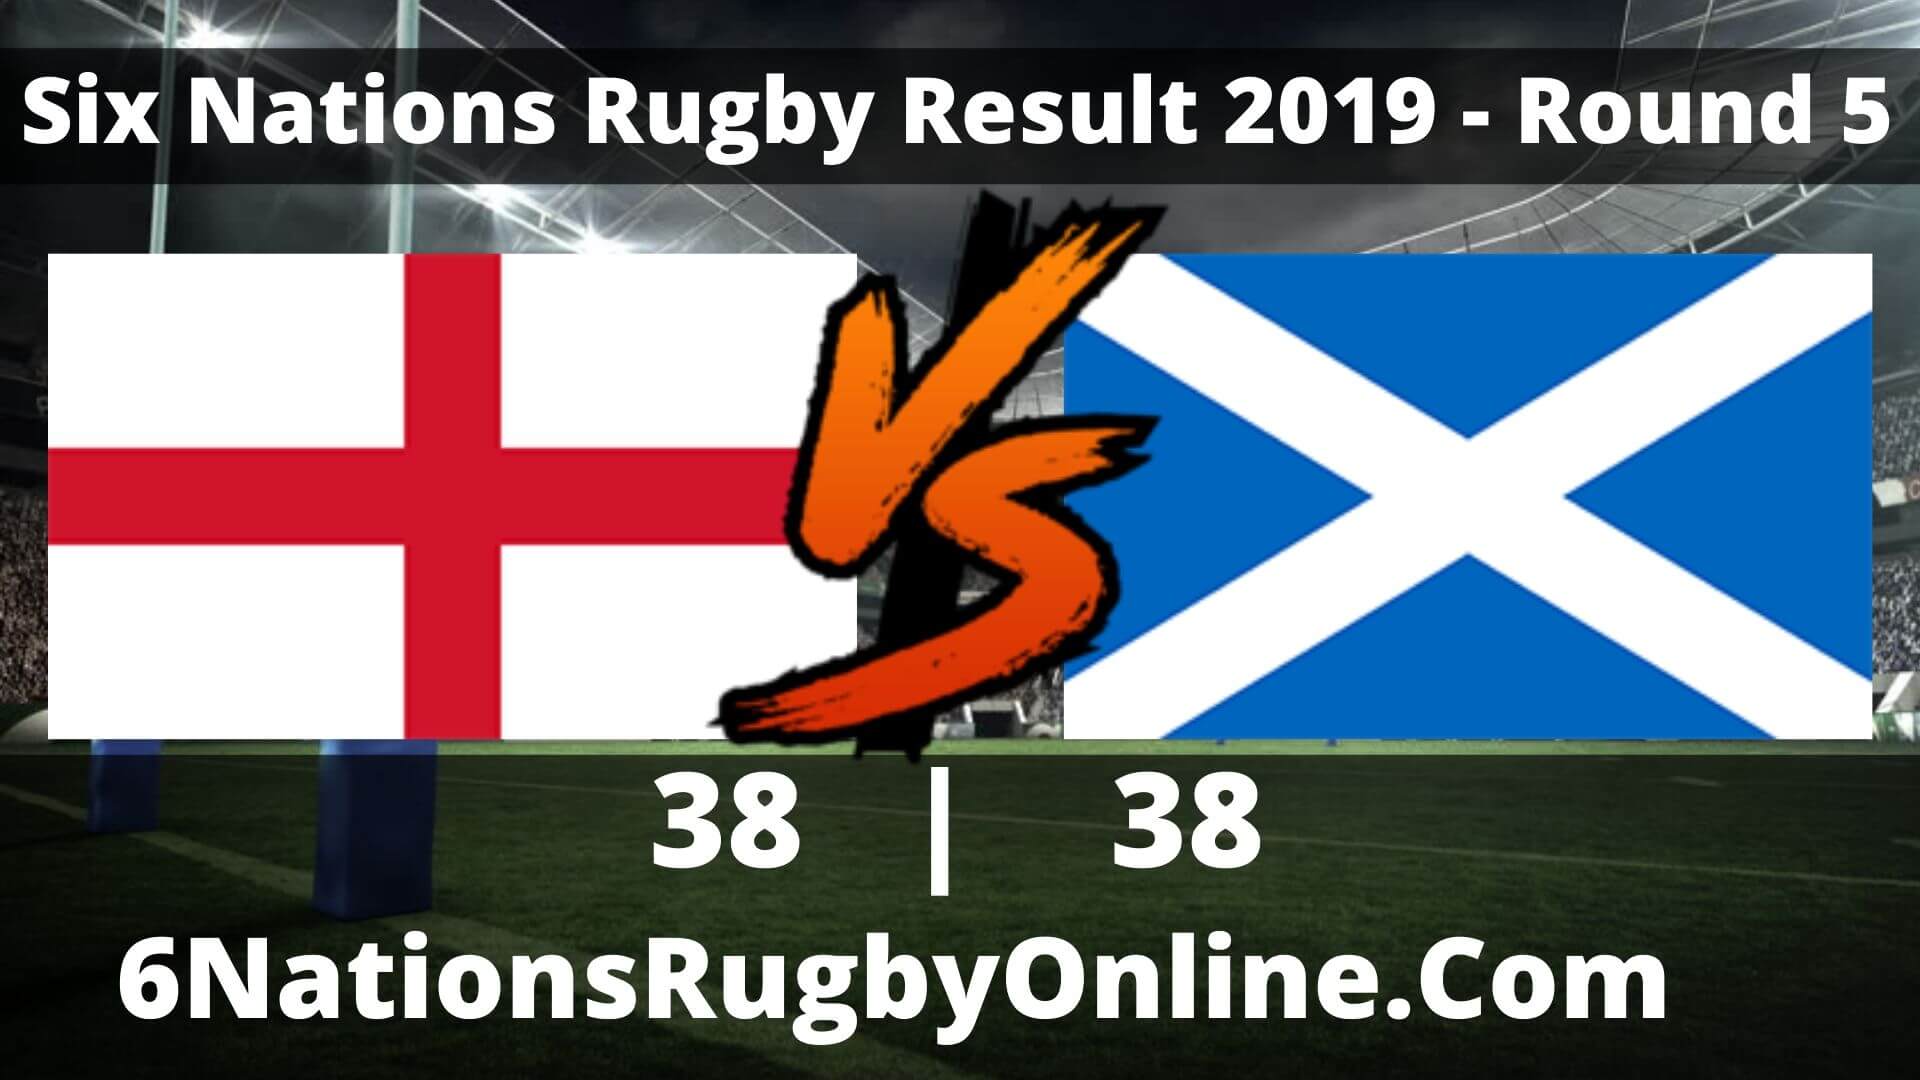 ENGLAND VS SCOTLAND Results 2019 | SIX NATIONS RUGBY ROUND 5